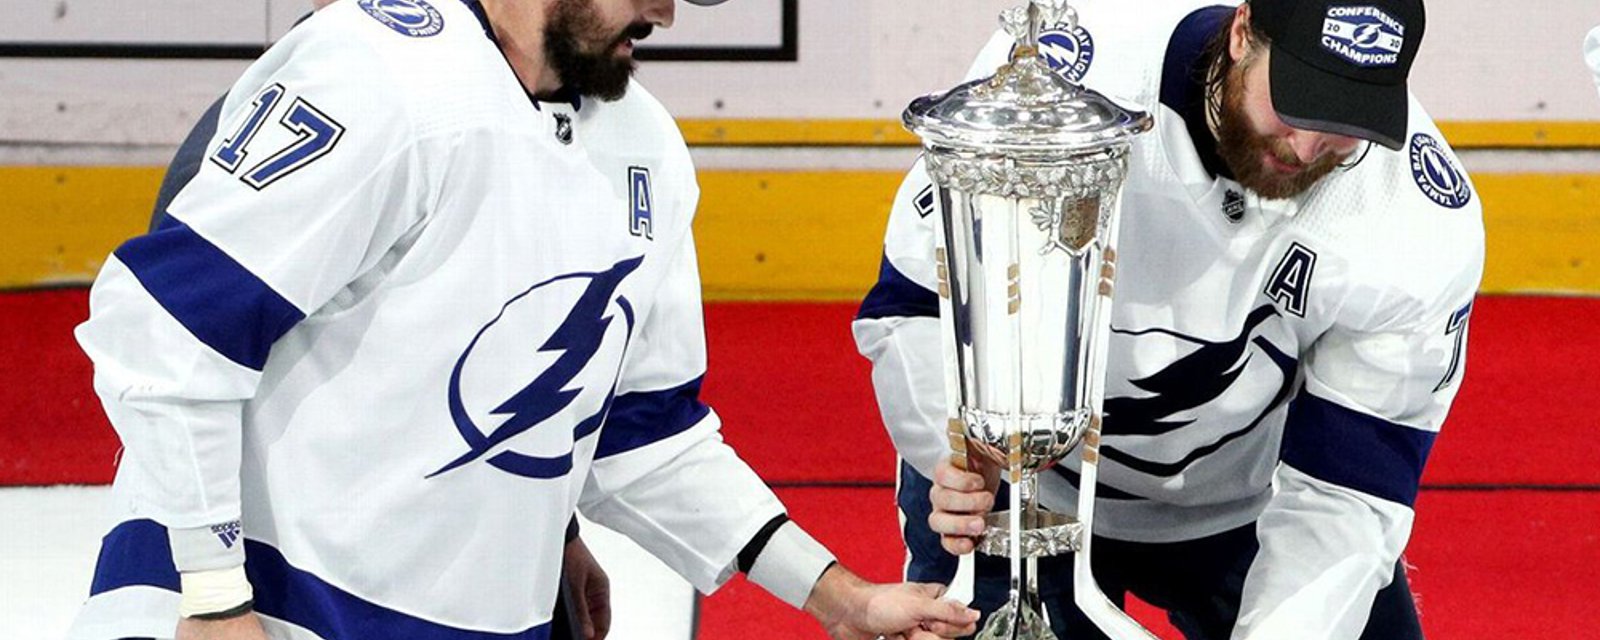 NHL confirms no one will win the Campbell Bowl or the Prince of Wales trophy this season